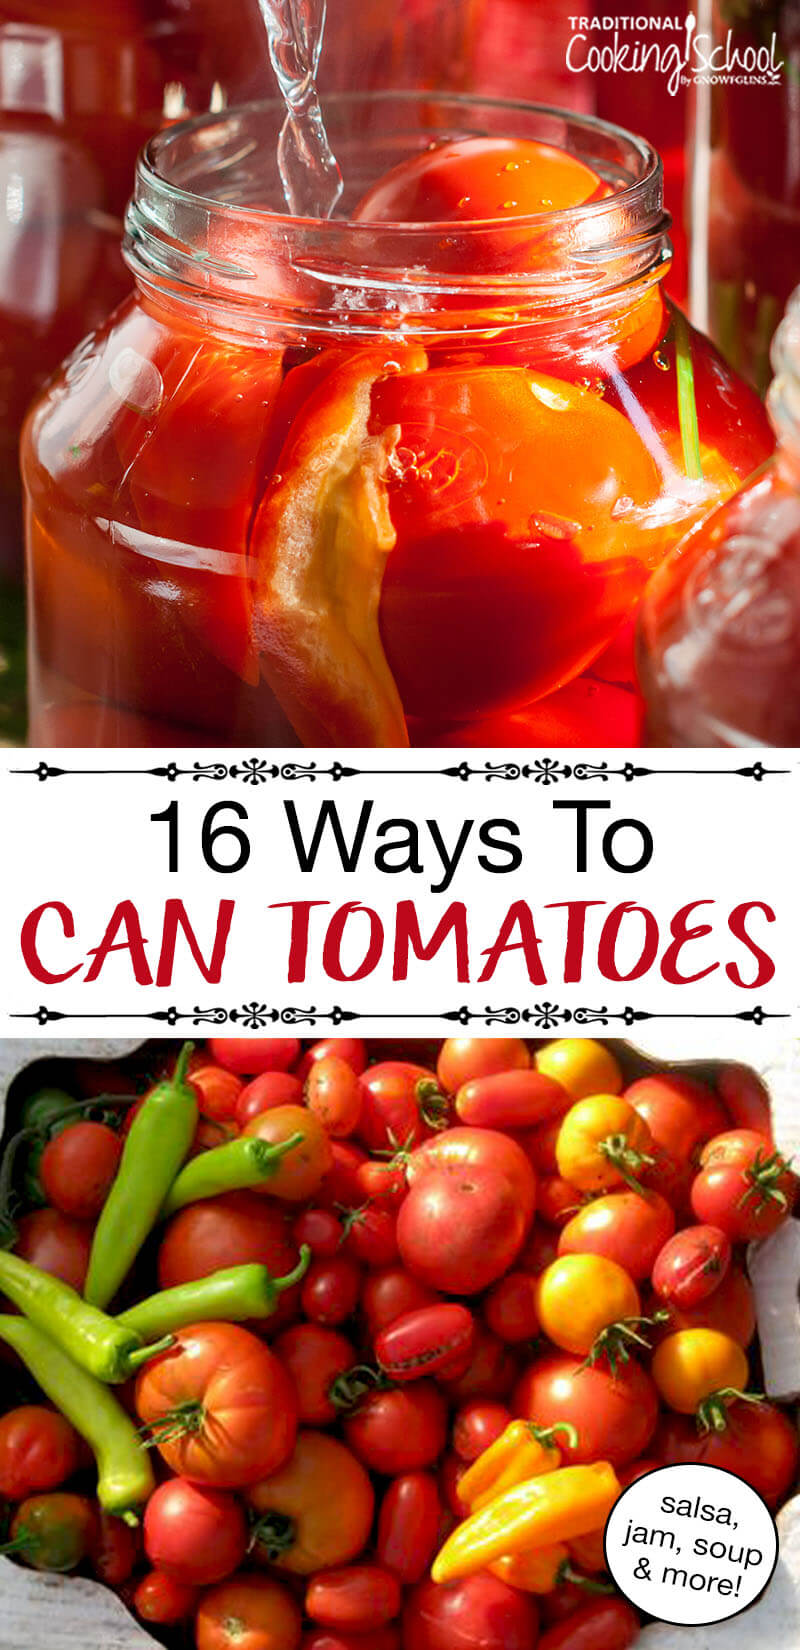 Pinterest pin with two images, the top of a jar filled with tomatoes and water being poured into the jar. The bottom image is of a variety of tomatoes in a sink. Text overlay says, "16 Ways to Can Tomatoes - Salsa, Jam, Soup & More!"